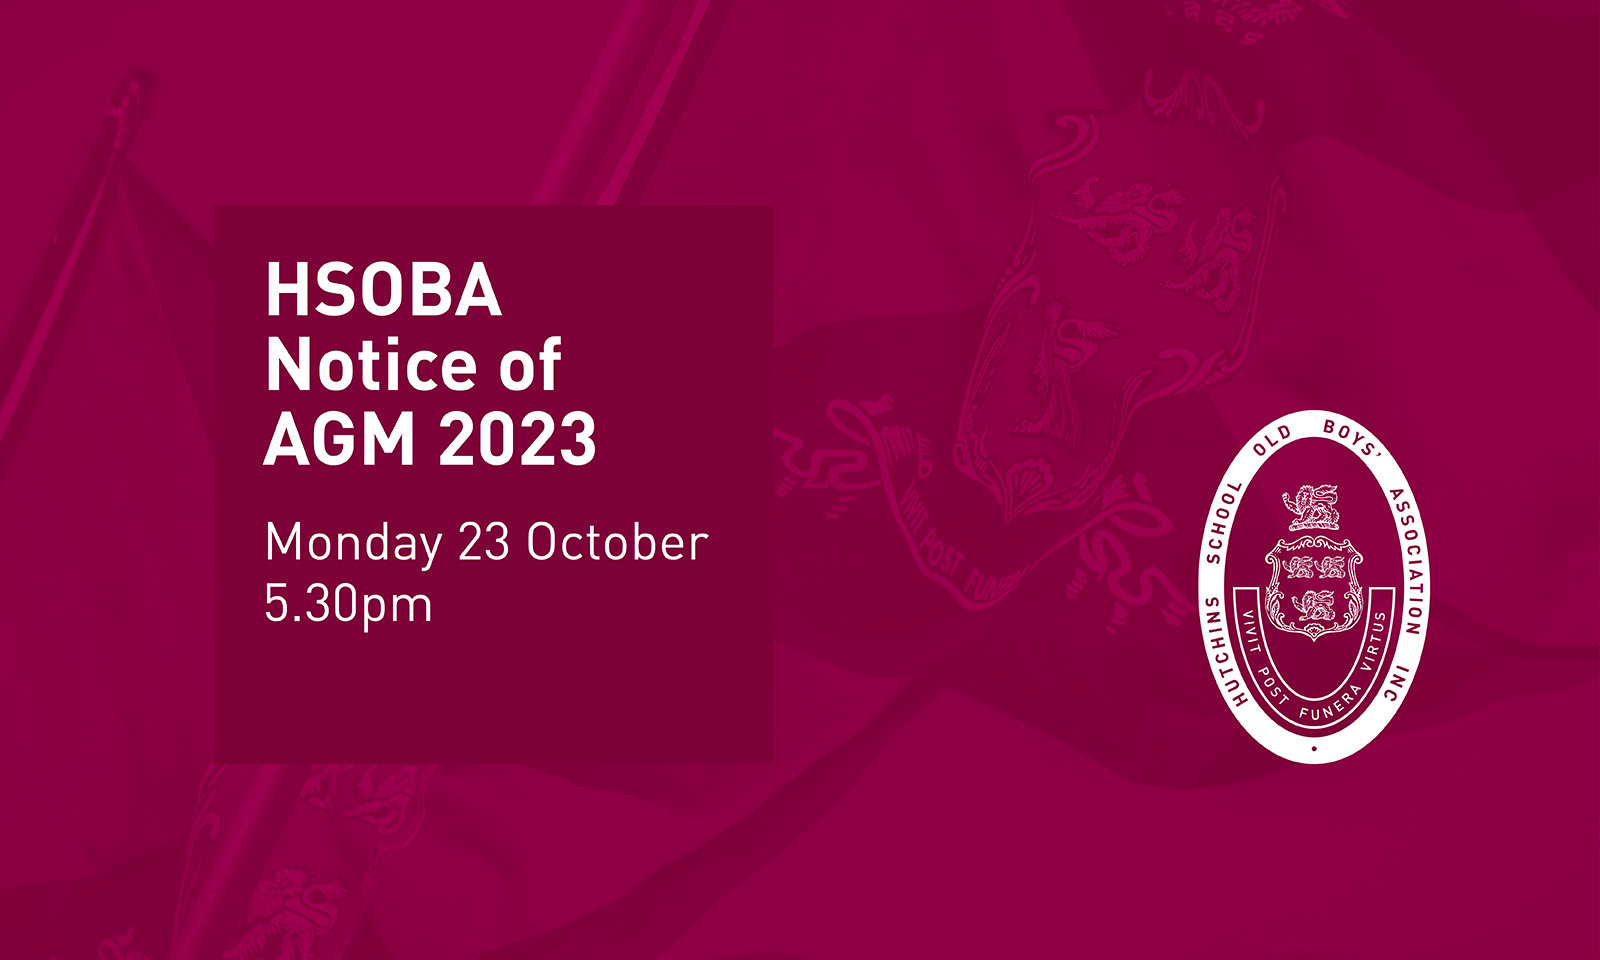 HSOBA Notice of AGM 2023 – 23 October 2023 at 5.30pm in the Hutchins Board Room